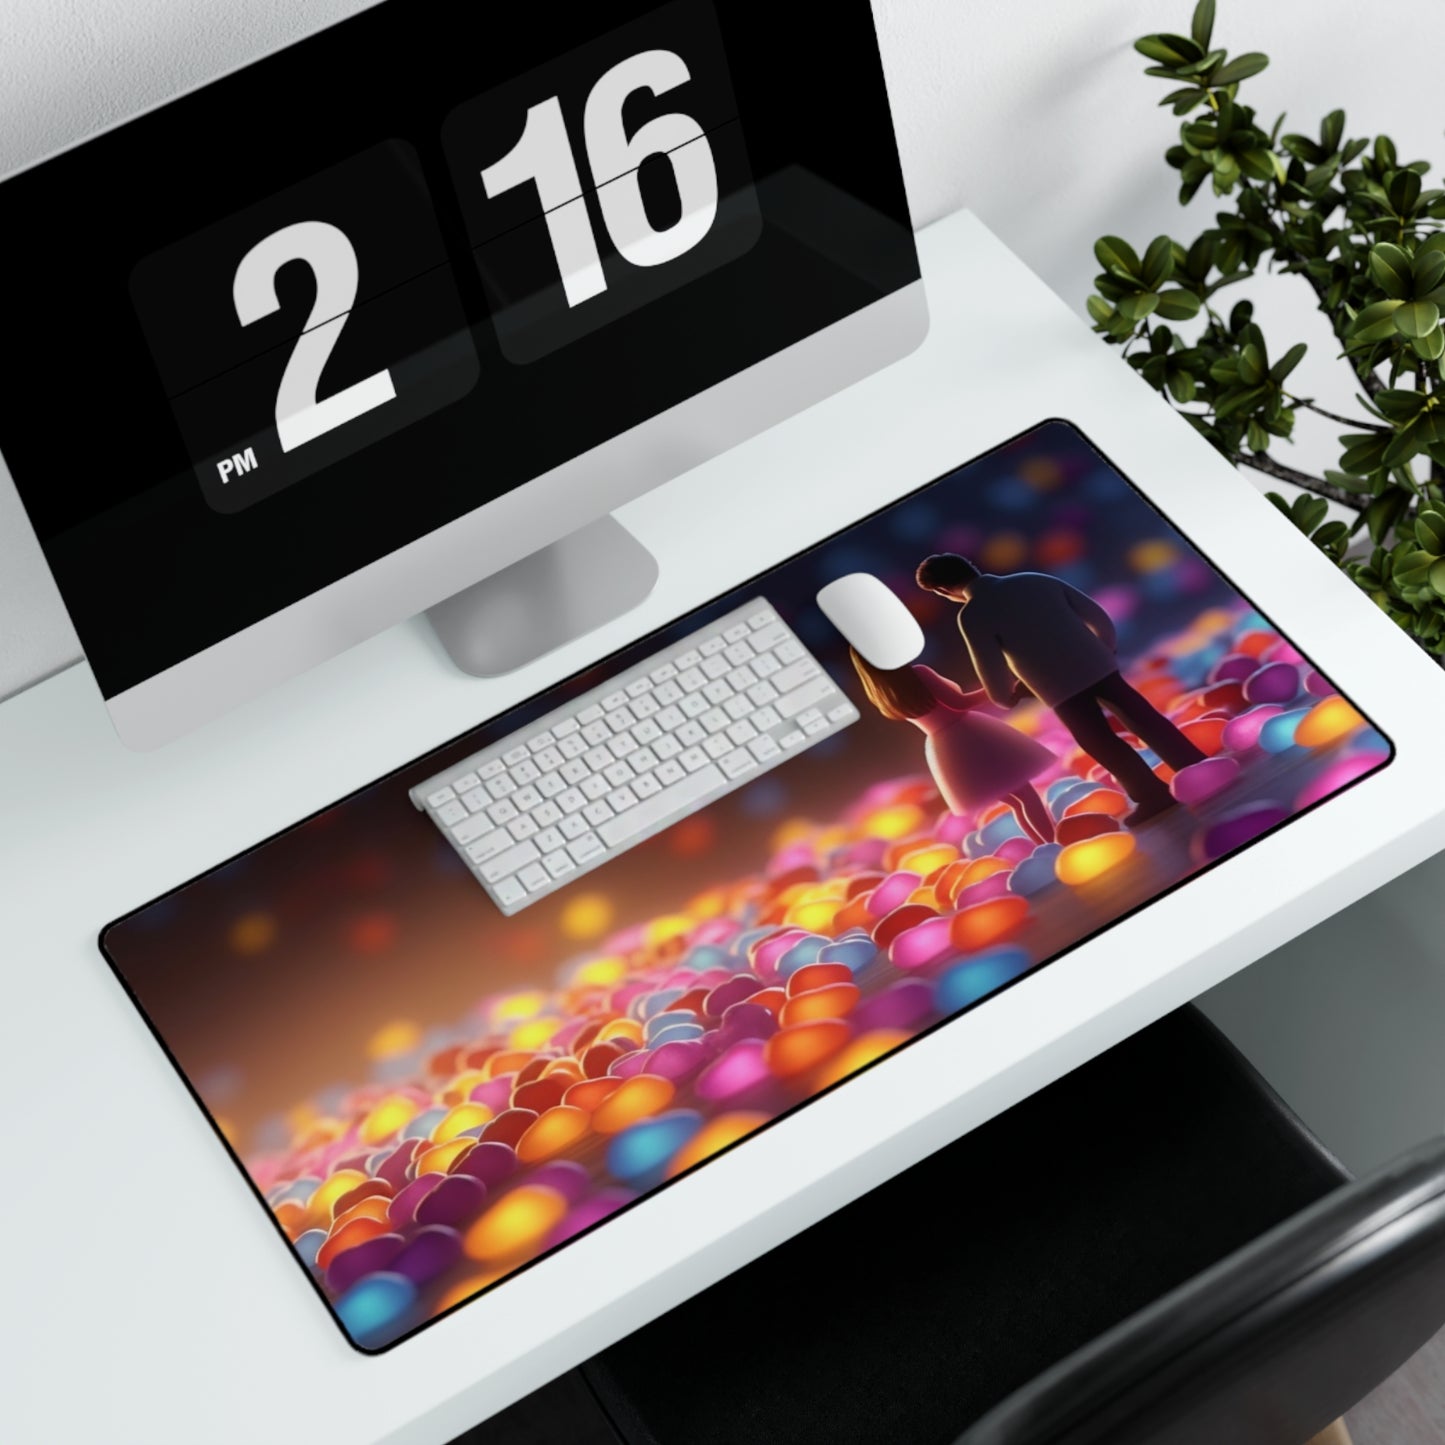 "Vibrant Workspace Pad" - Rectangular Large Extended Gaming Computer Mouse Pad